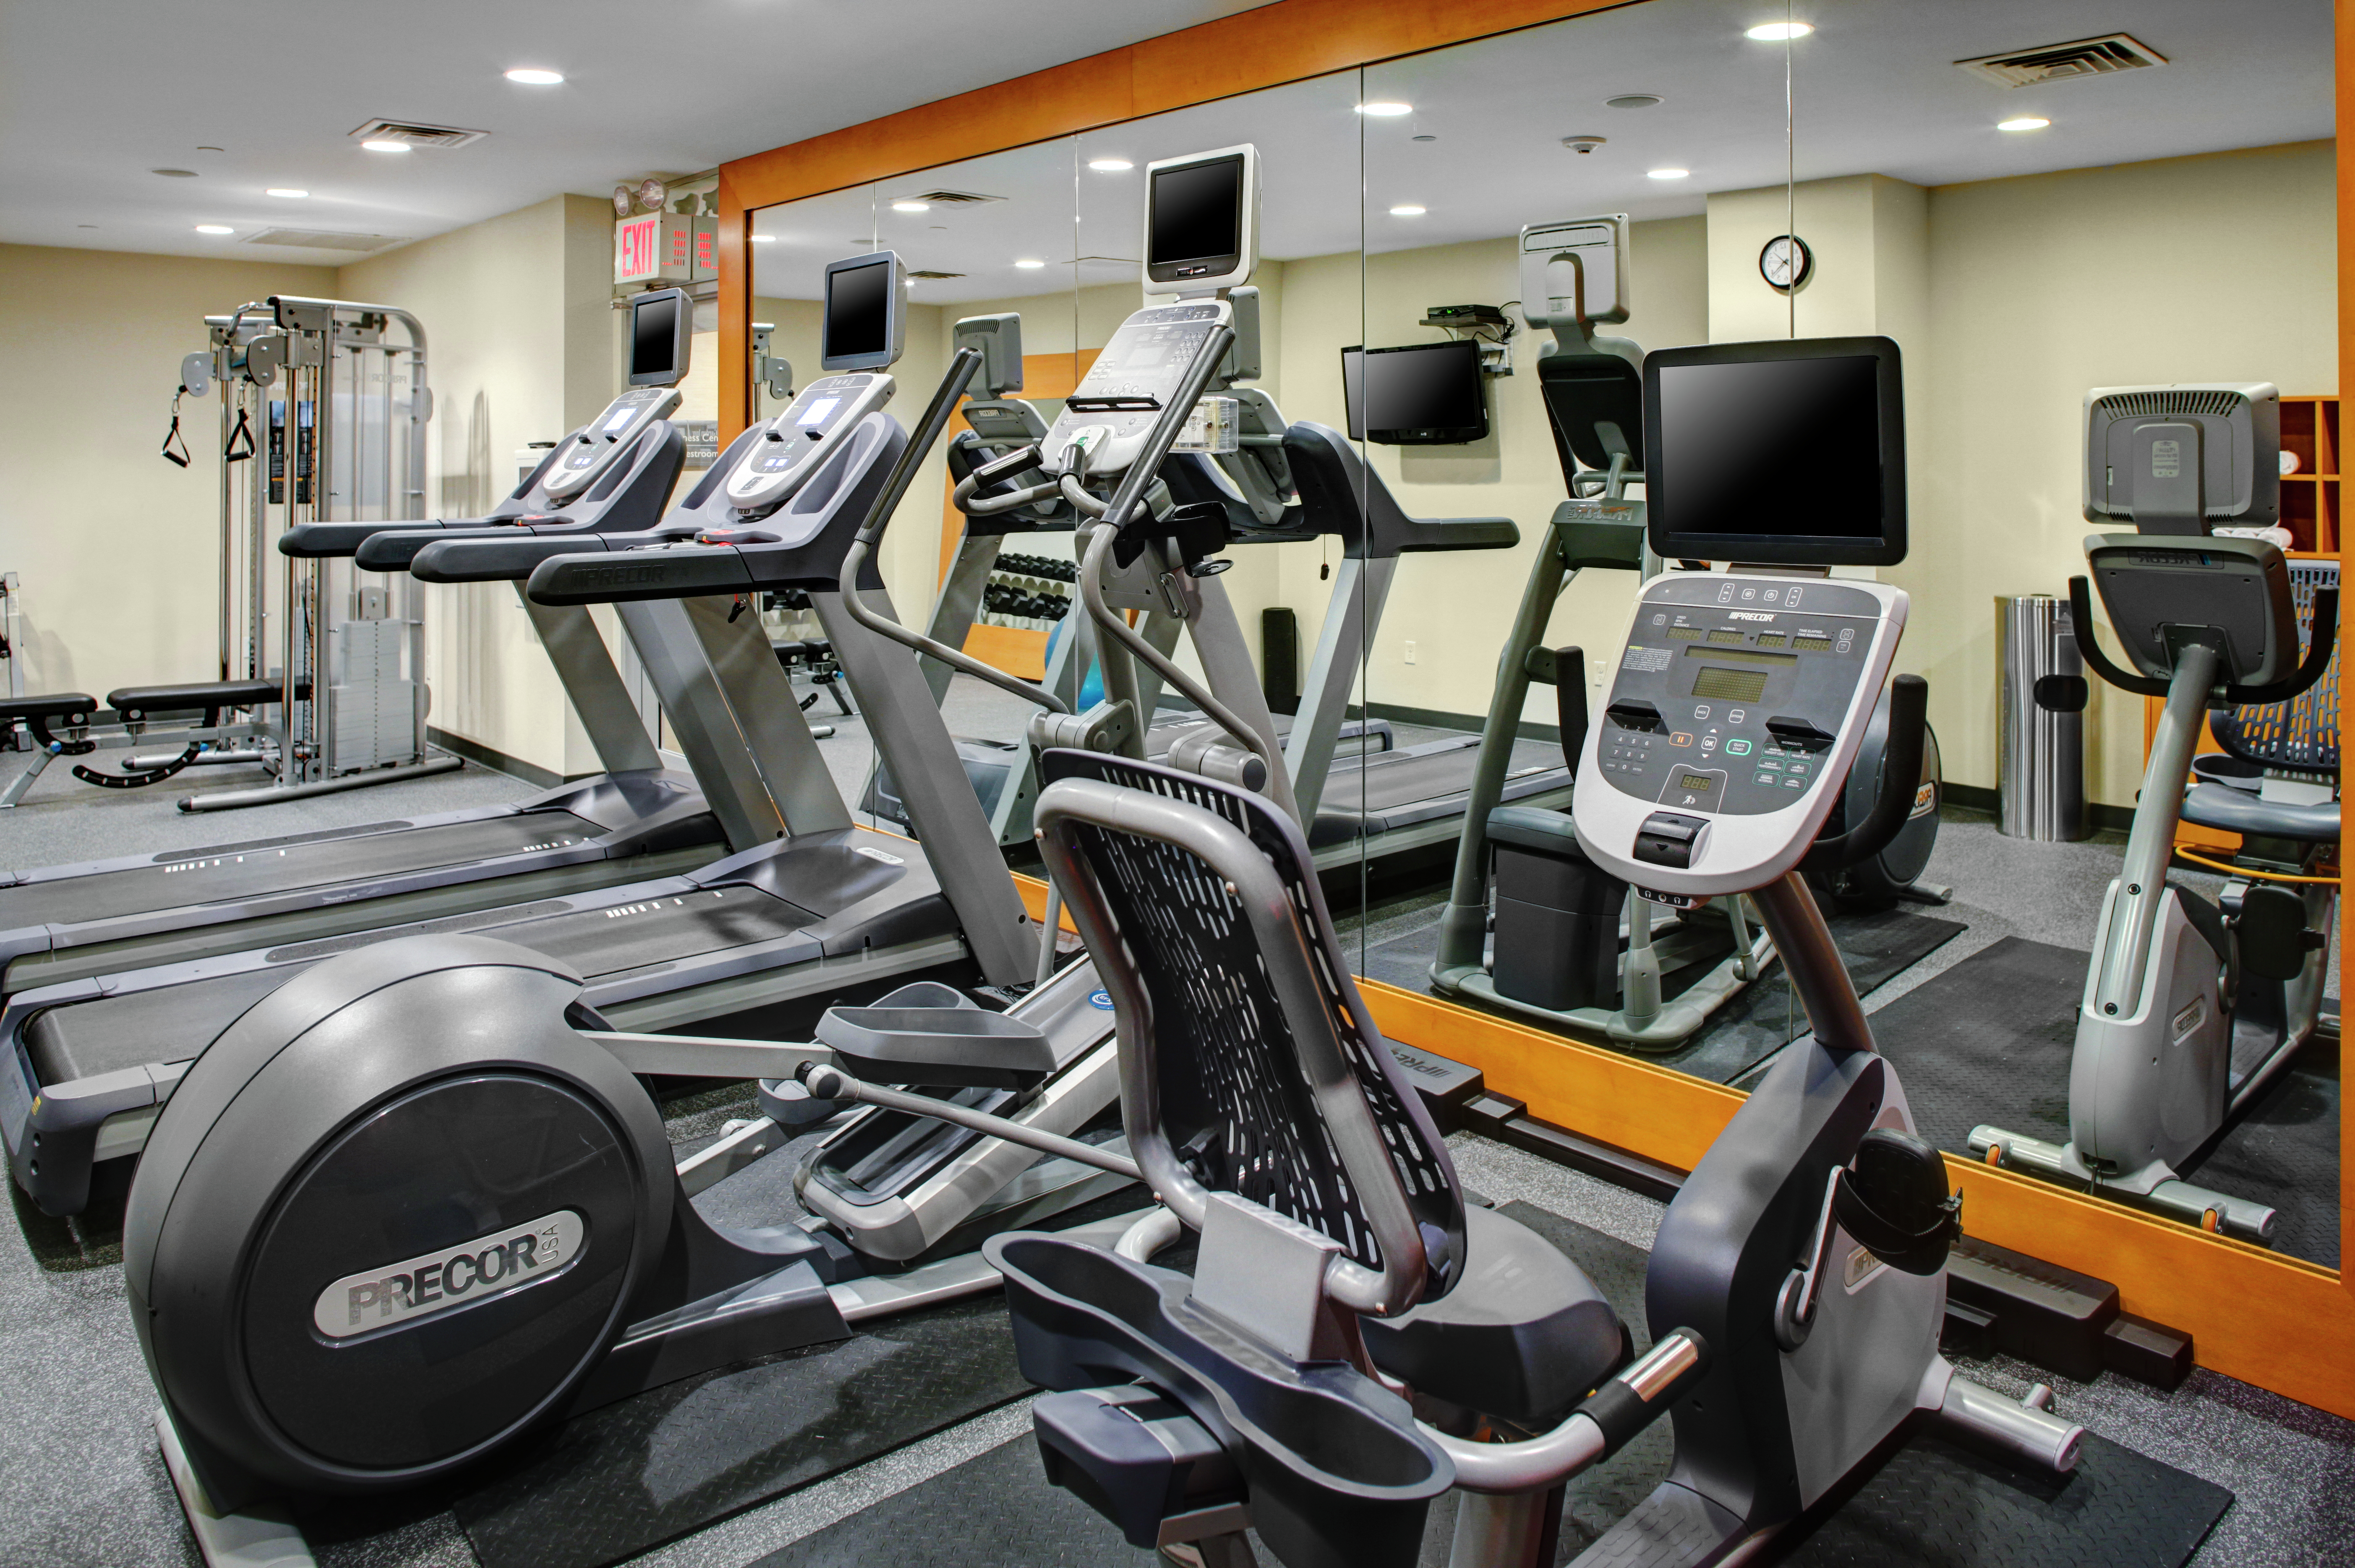 Fitness Center With TV, Weight Machine, Mirrored Wall, and Cardio Equipment, 